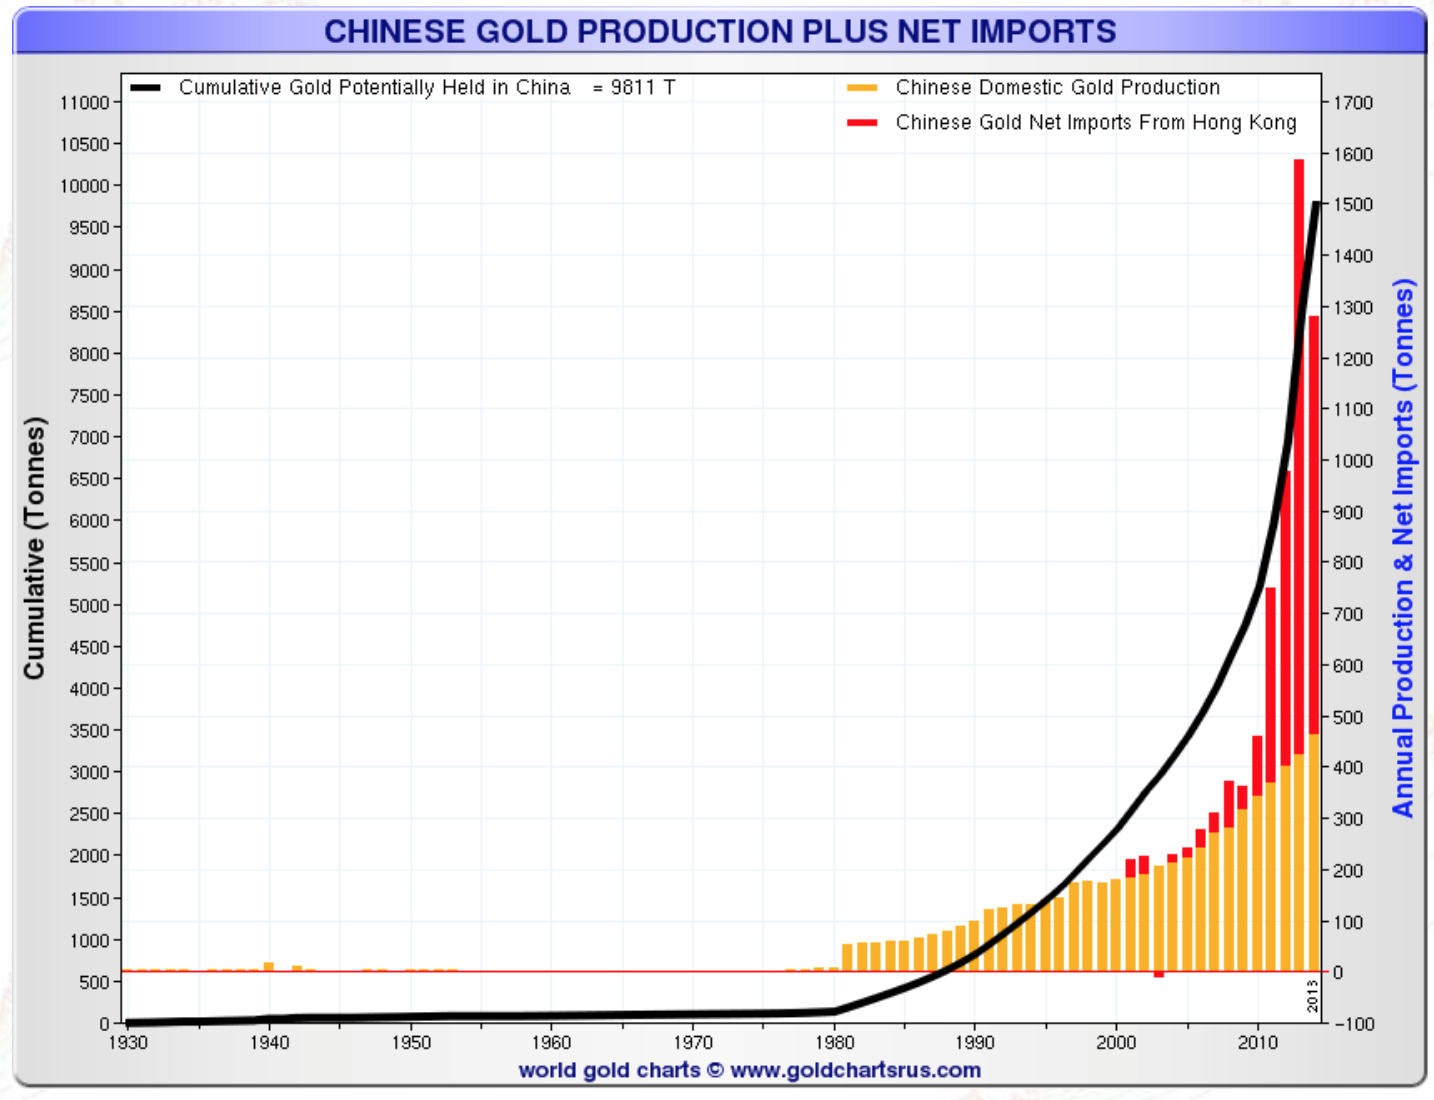 Production chinoise d’or plus importations nettes